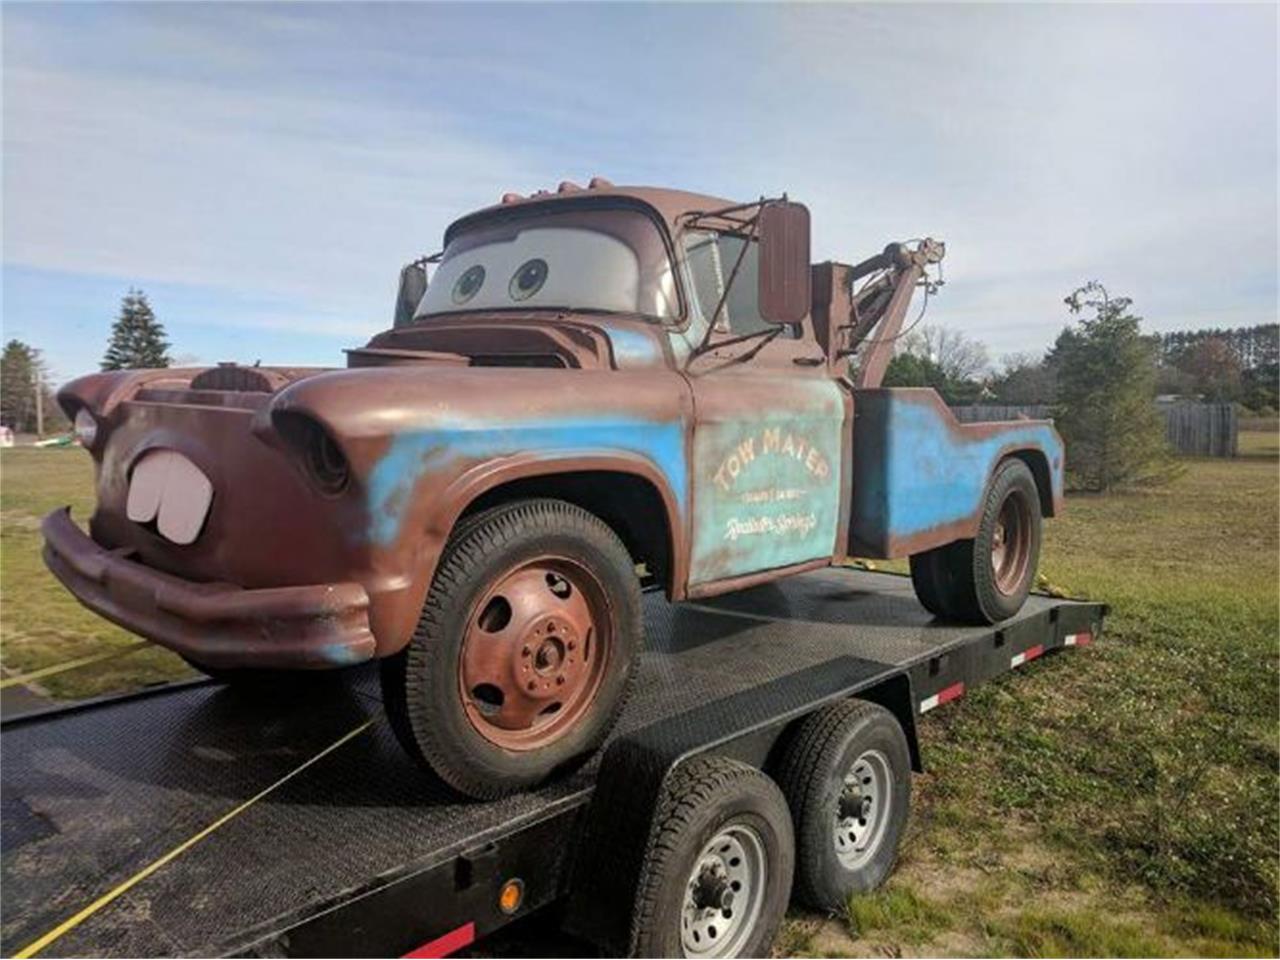 1957 Chevrolet Tow Truck for Sale | www.paulmartinsmith.com | CC-1113822